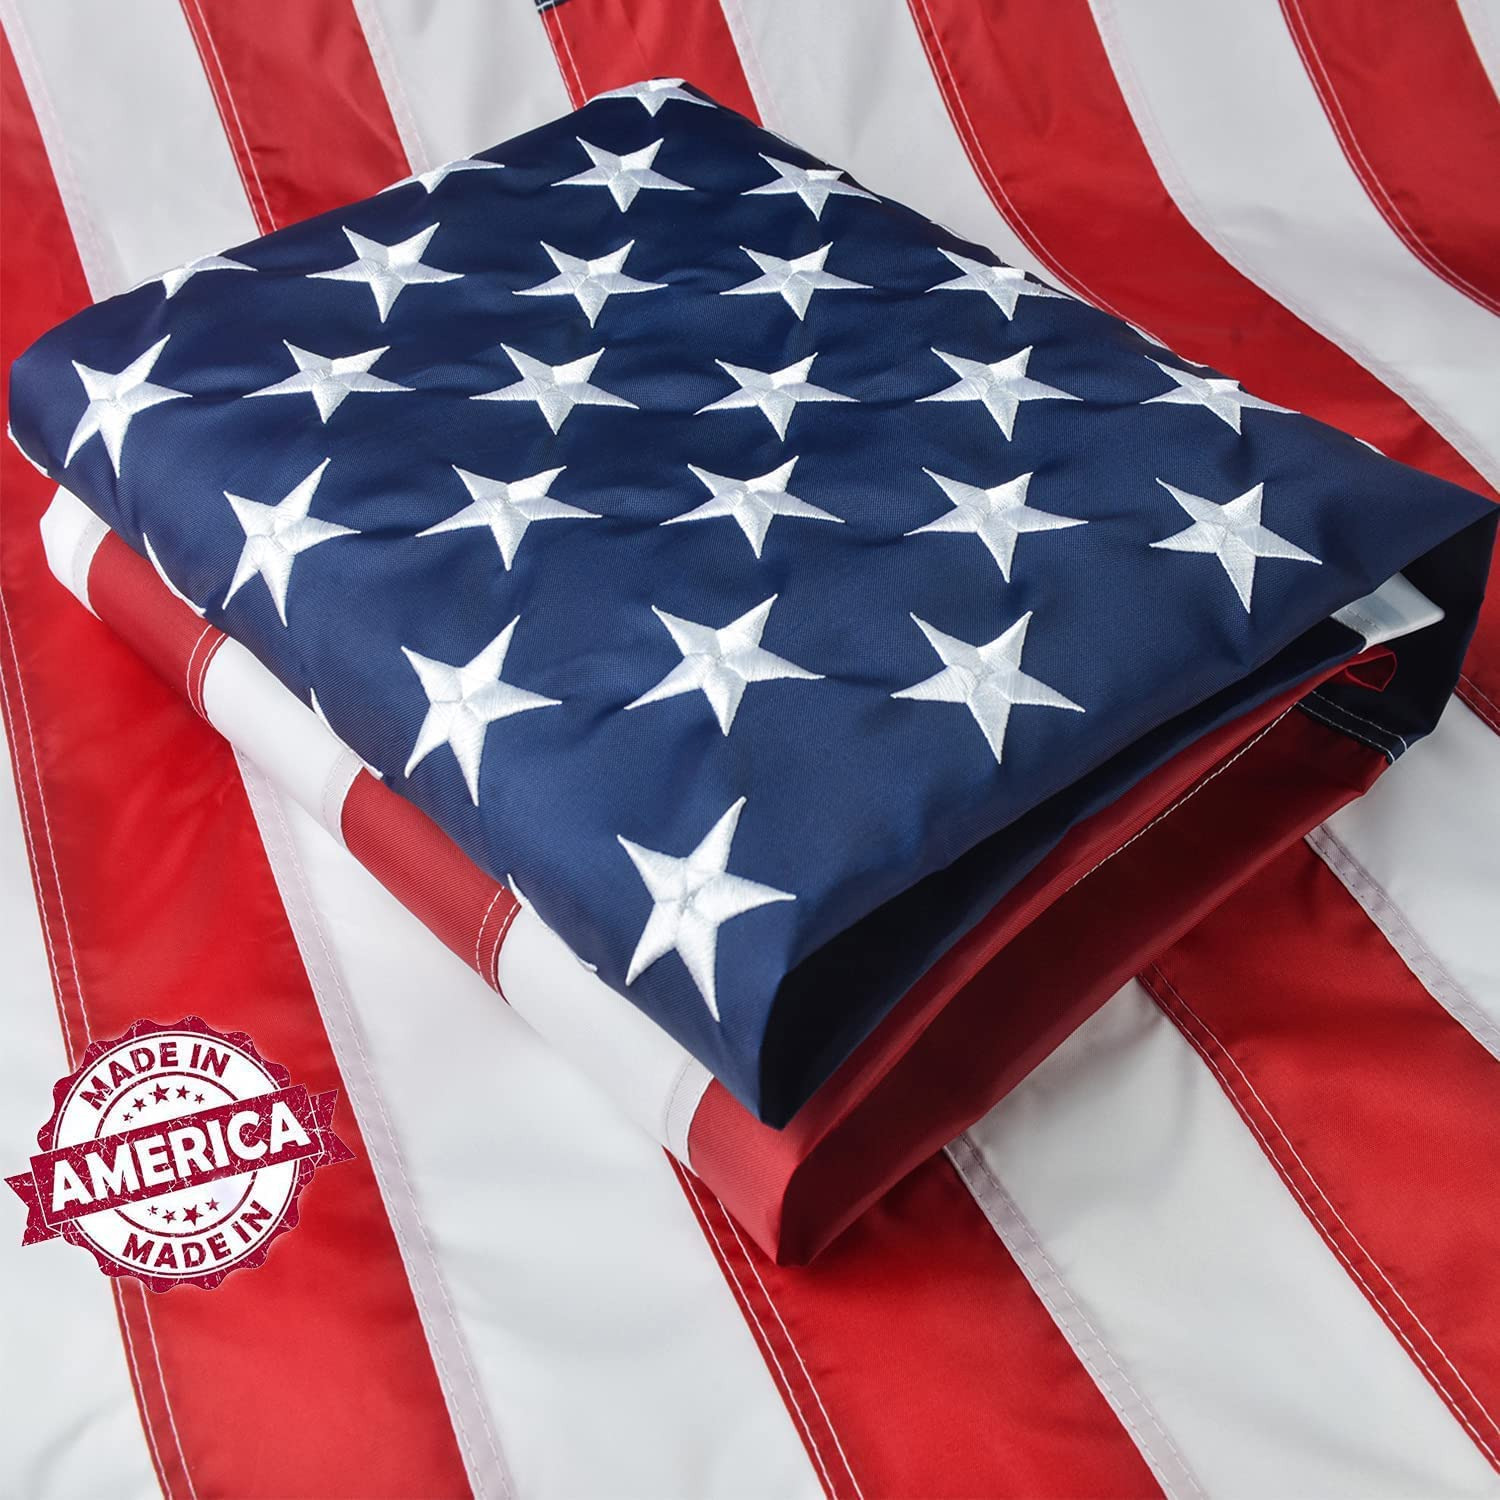 2x3 American Flag Outdoor Heavy Duty, 100% Made in USA, US Flag 2x3 ft, USA Flag